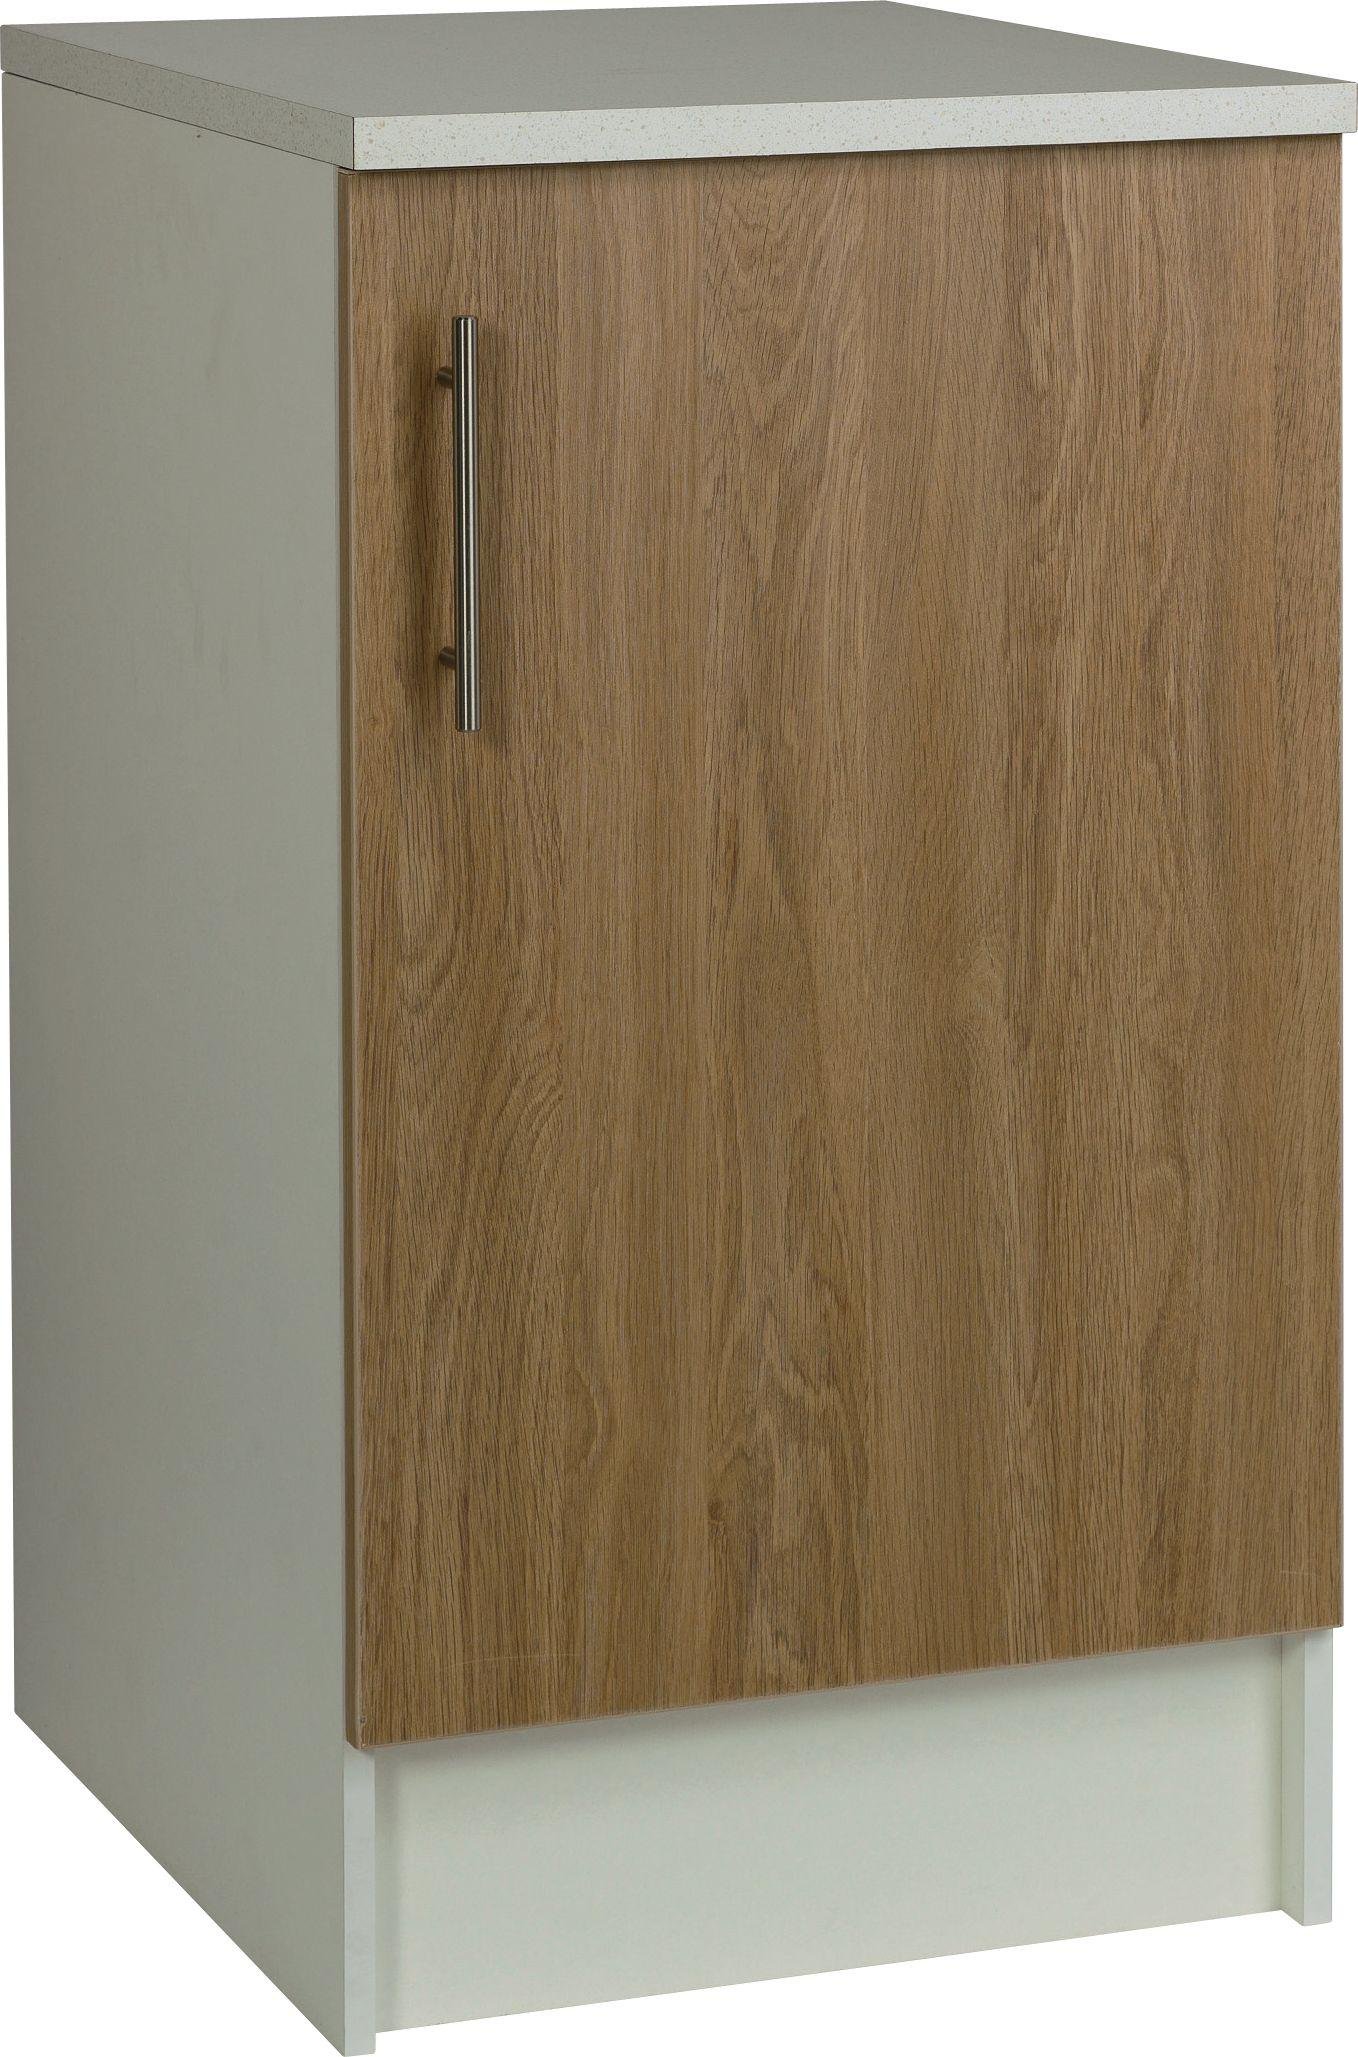 Argos Home Athina 500mm Fitted Kitchen Base Unit -Oak Effect